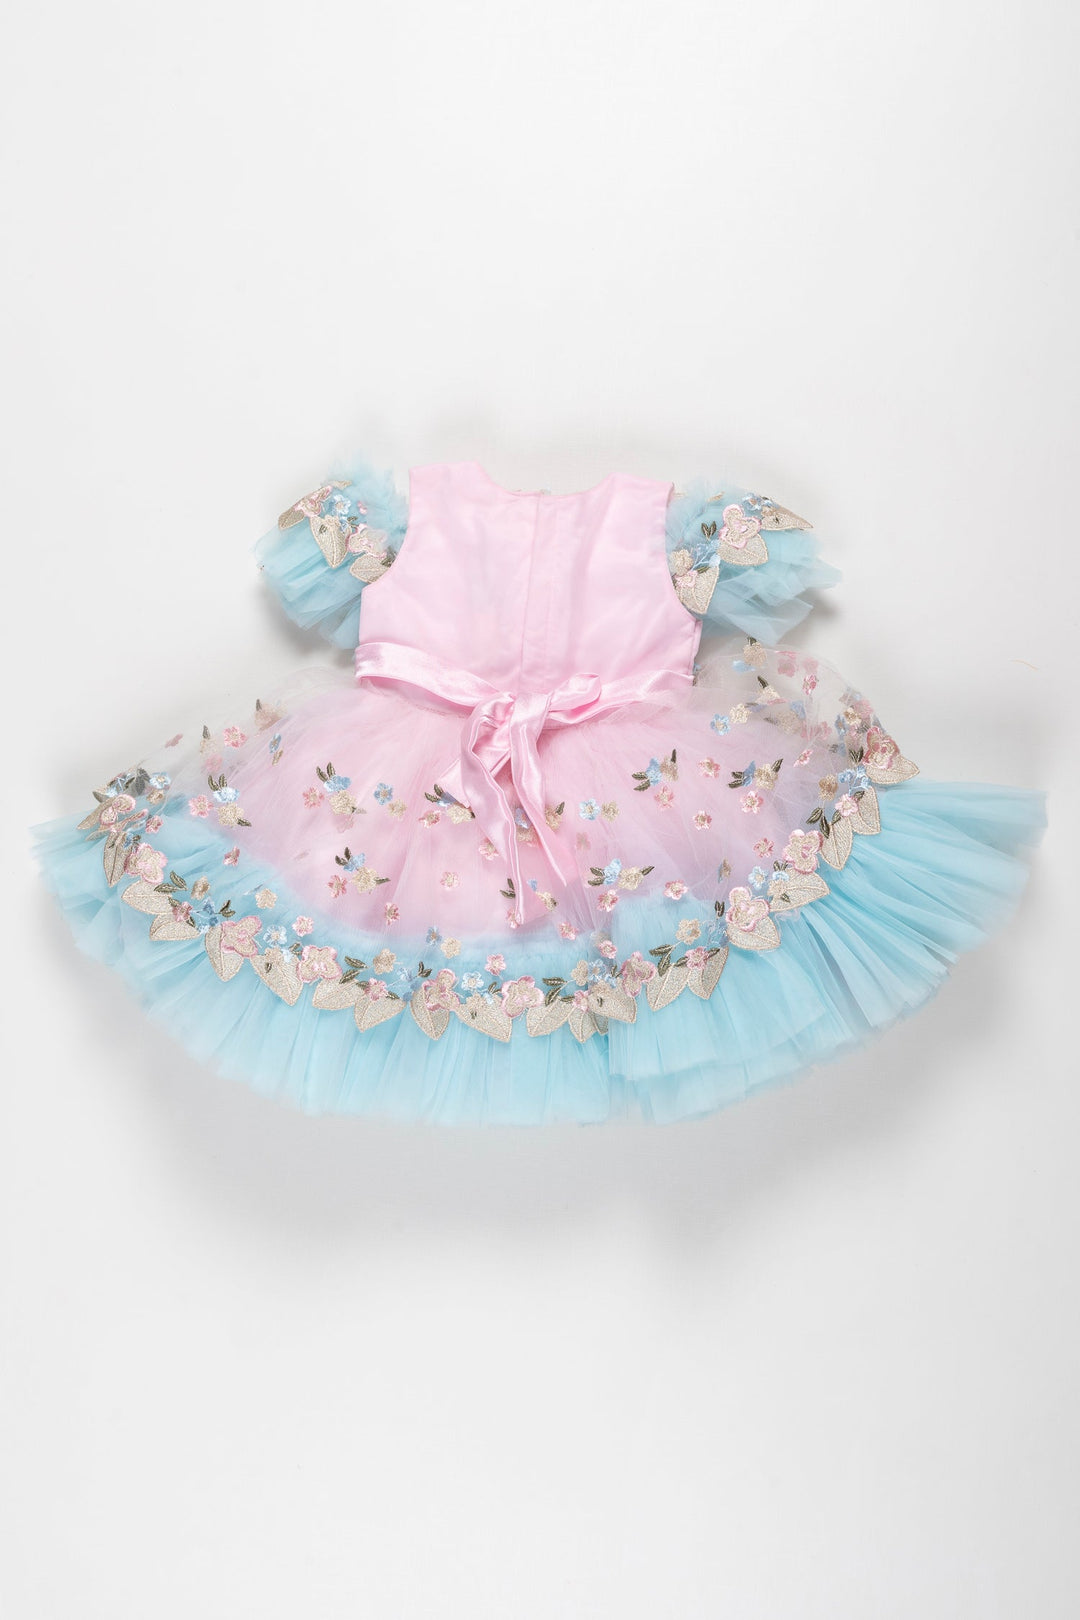 The Nesavu Girls Tutu Frock Enchanted Blossom: Baby Girl's Tulle Party Frock with Floral Embroidery Nesavu Buy Enchanted Blossom Party Frock | Dreamy Tulle Dress for Baby Girls | The Nesavu